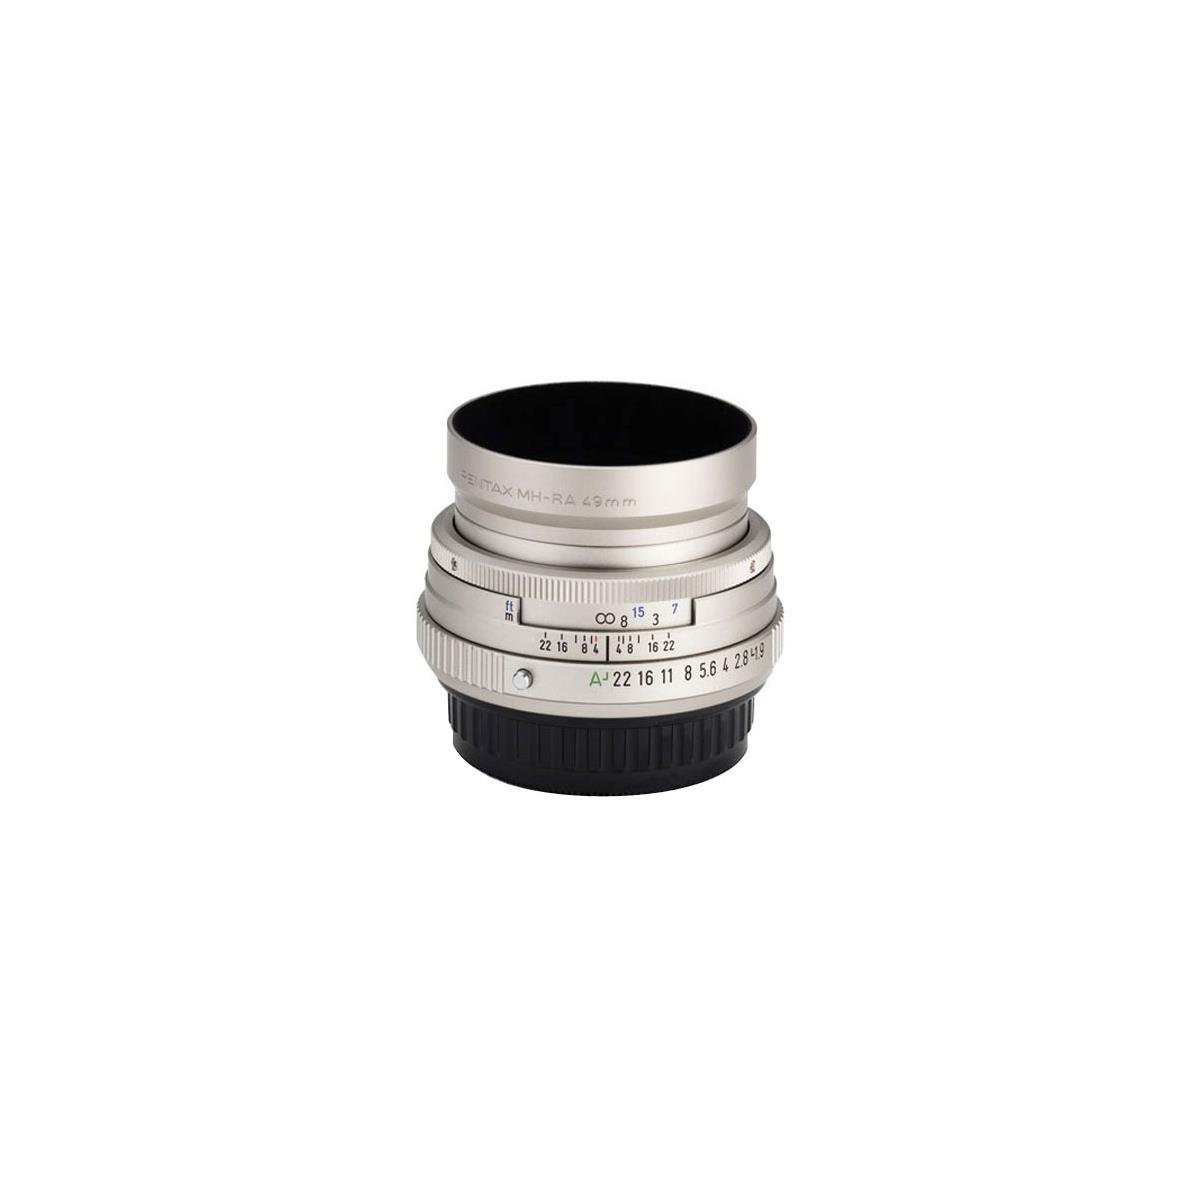 

Pentax SMCP-FA 43mm f/1.9 Standard Auto Focus Limited Edition Lens with Case & Hood - Silver